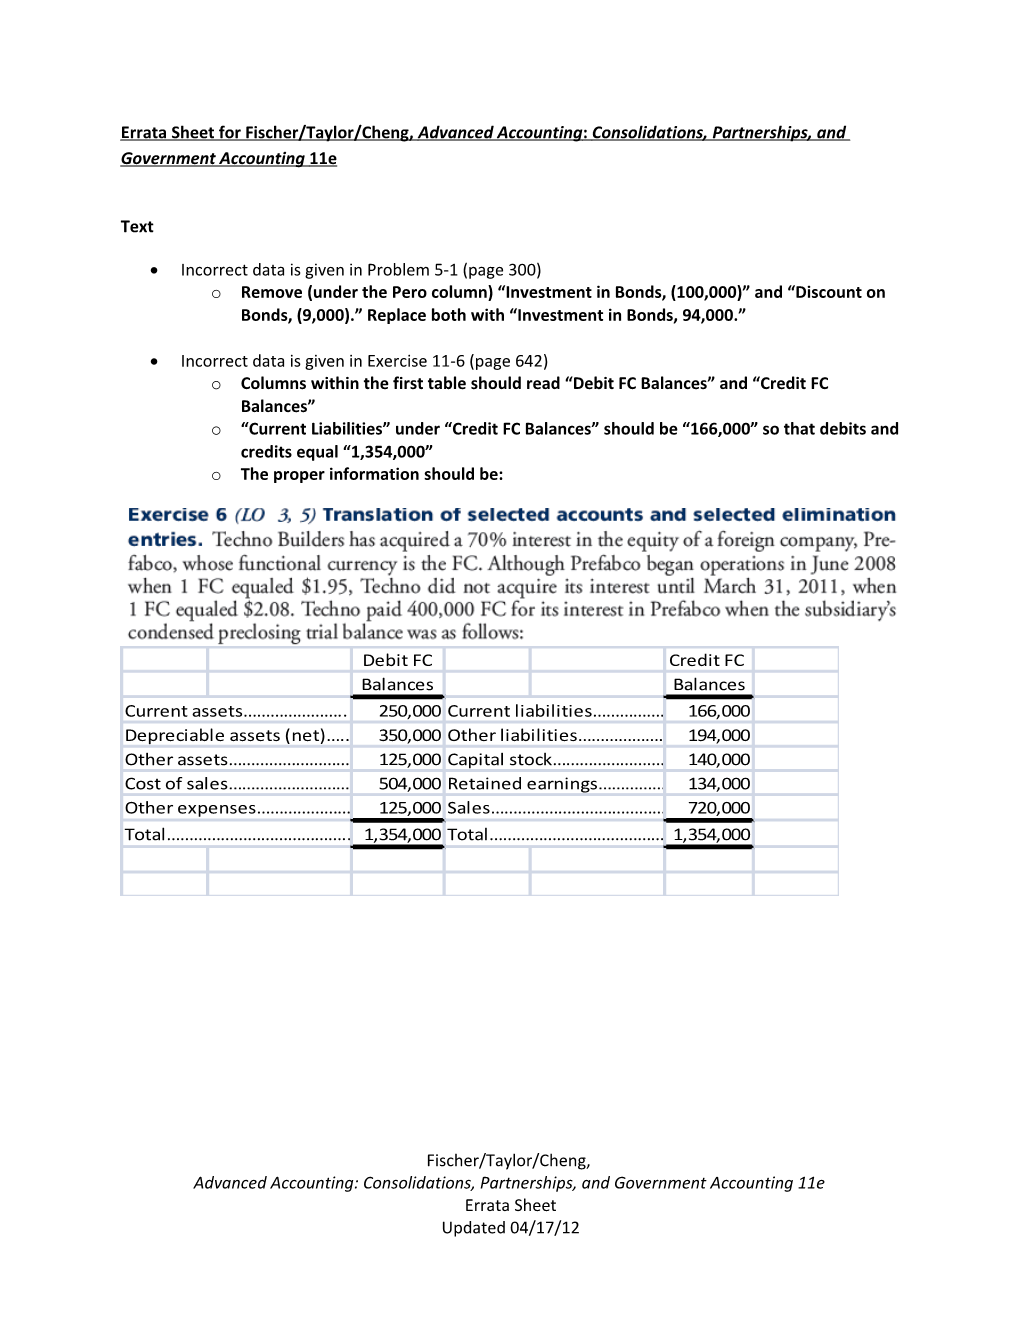 Errata Sheet for Fischer/Taylor/Cheng, Advanced Accounting: Consolidations, Partnerships